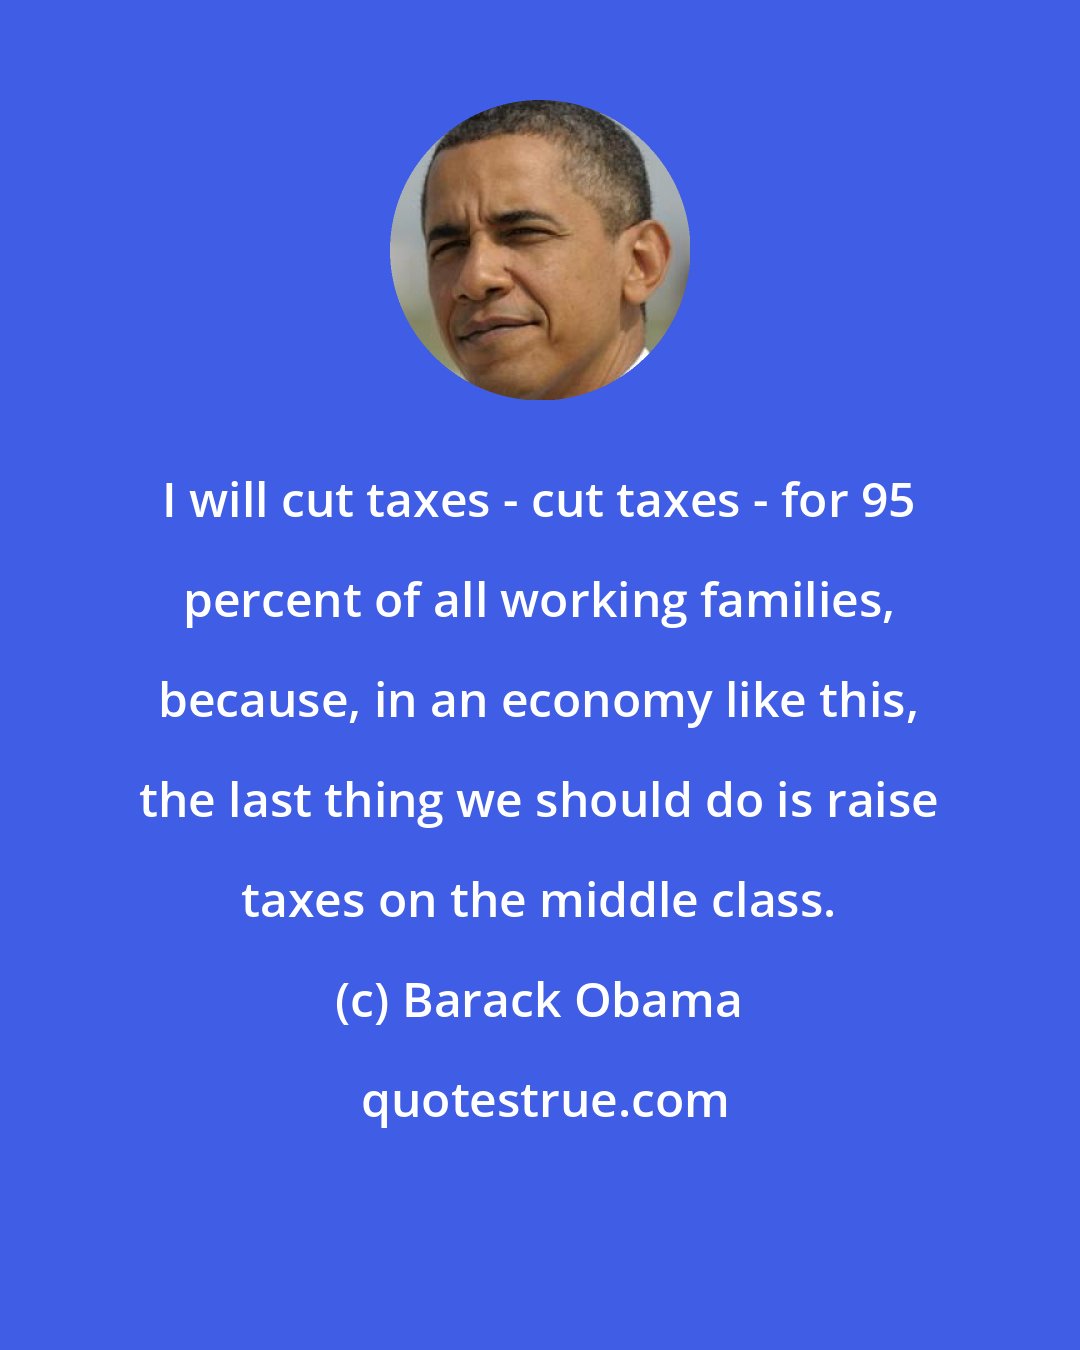 Barack Obama: I will cut taxes - cut taxes - for 95 percent of all working families, because, in an economy like this, the last thing we should do is raise taxes on the middle class.